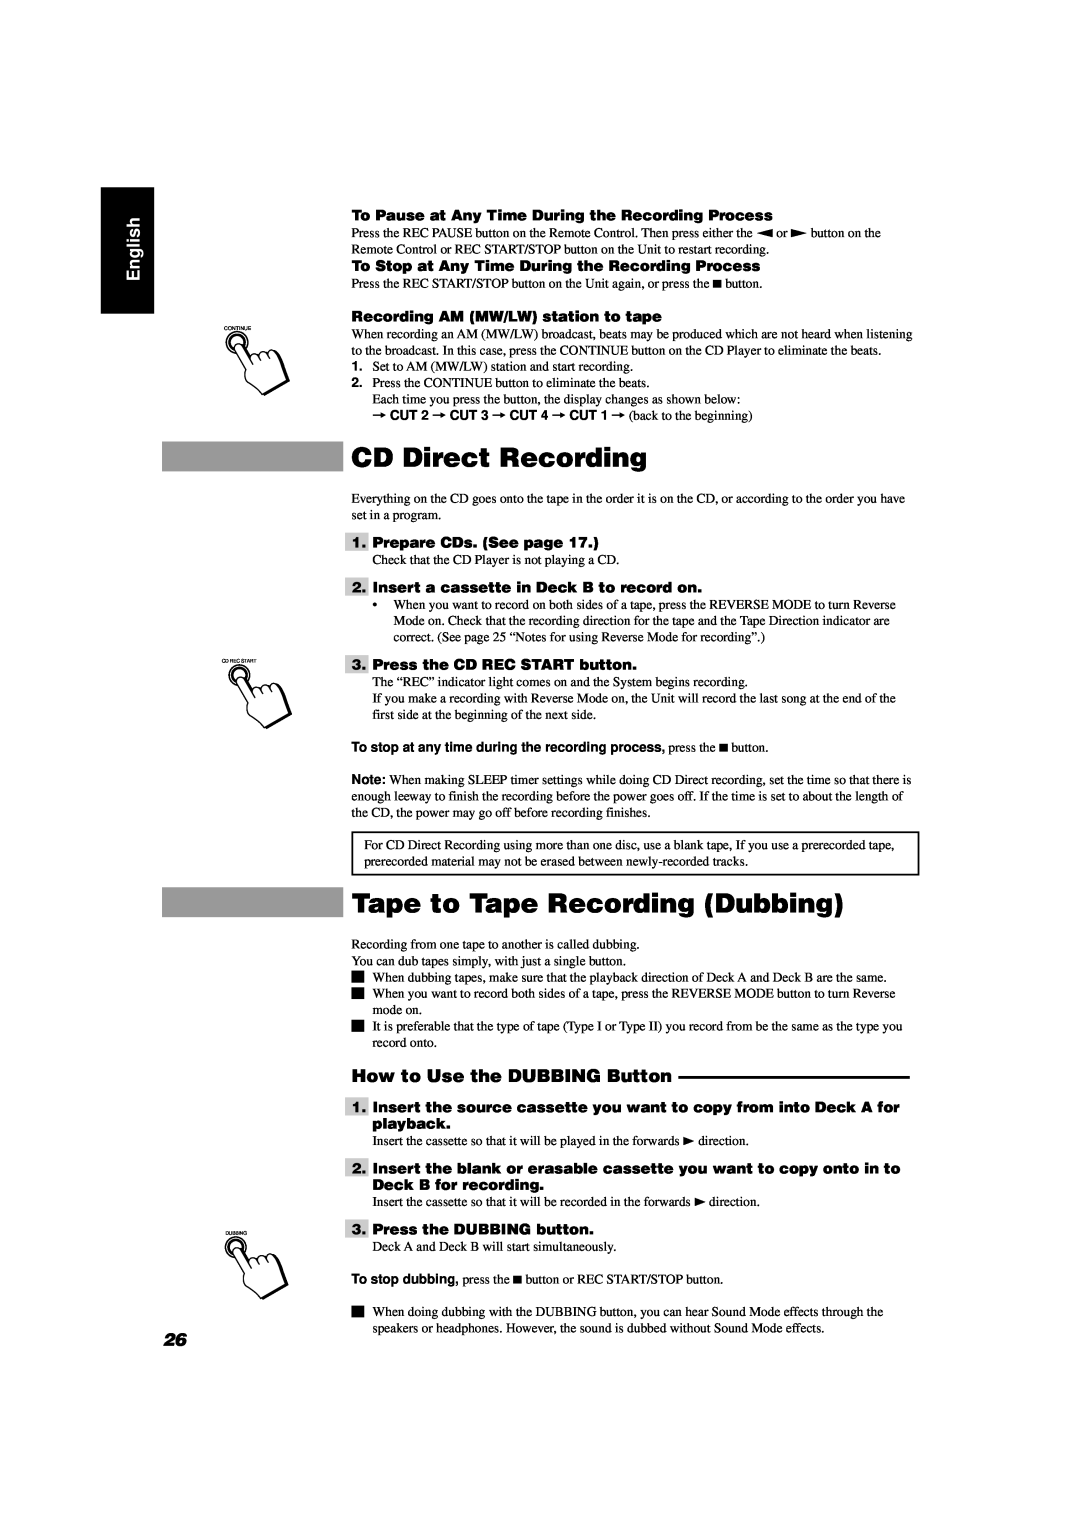 JVC CA-D551TR, CA-D351TR manual CD Direct Recording, Tape to Tape Recording Dubbing, How to Use the DUBBING Button, English 